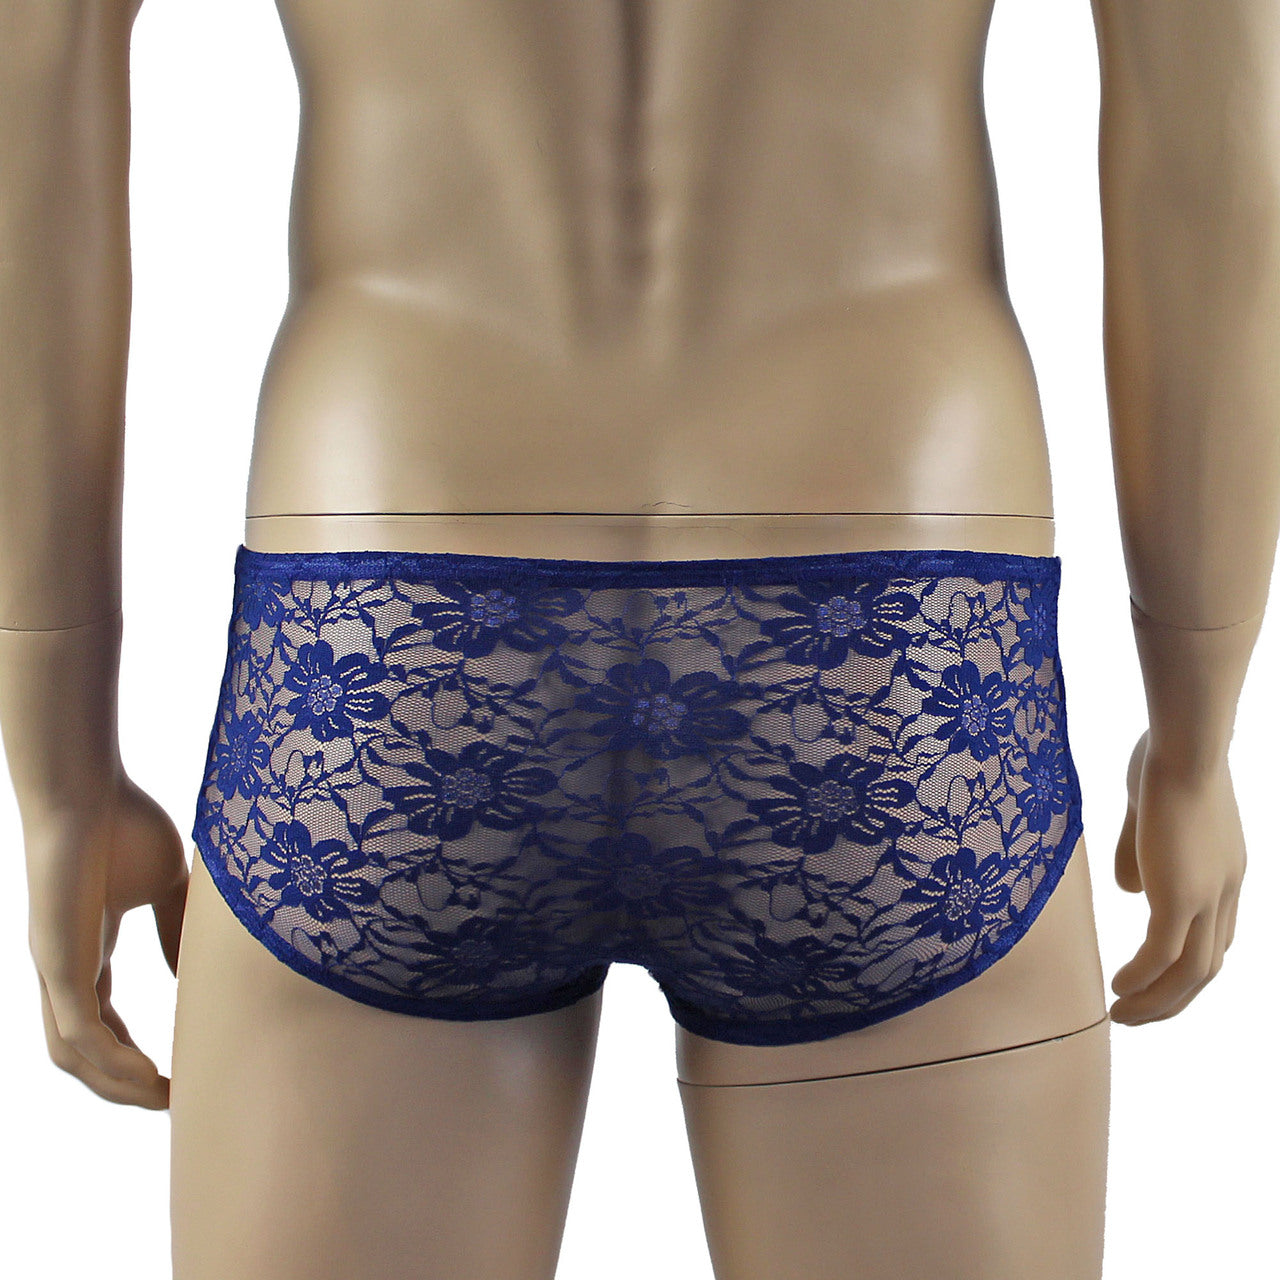 LAST ORDERS - Mens Sexy Lace Crop Bra Top Camisole and Male Lingerie Panty Briefs Navy